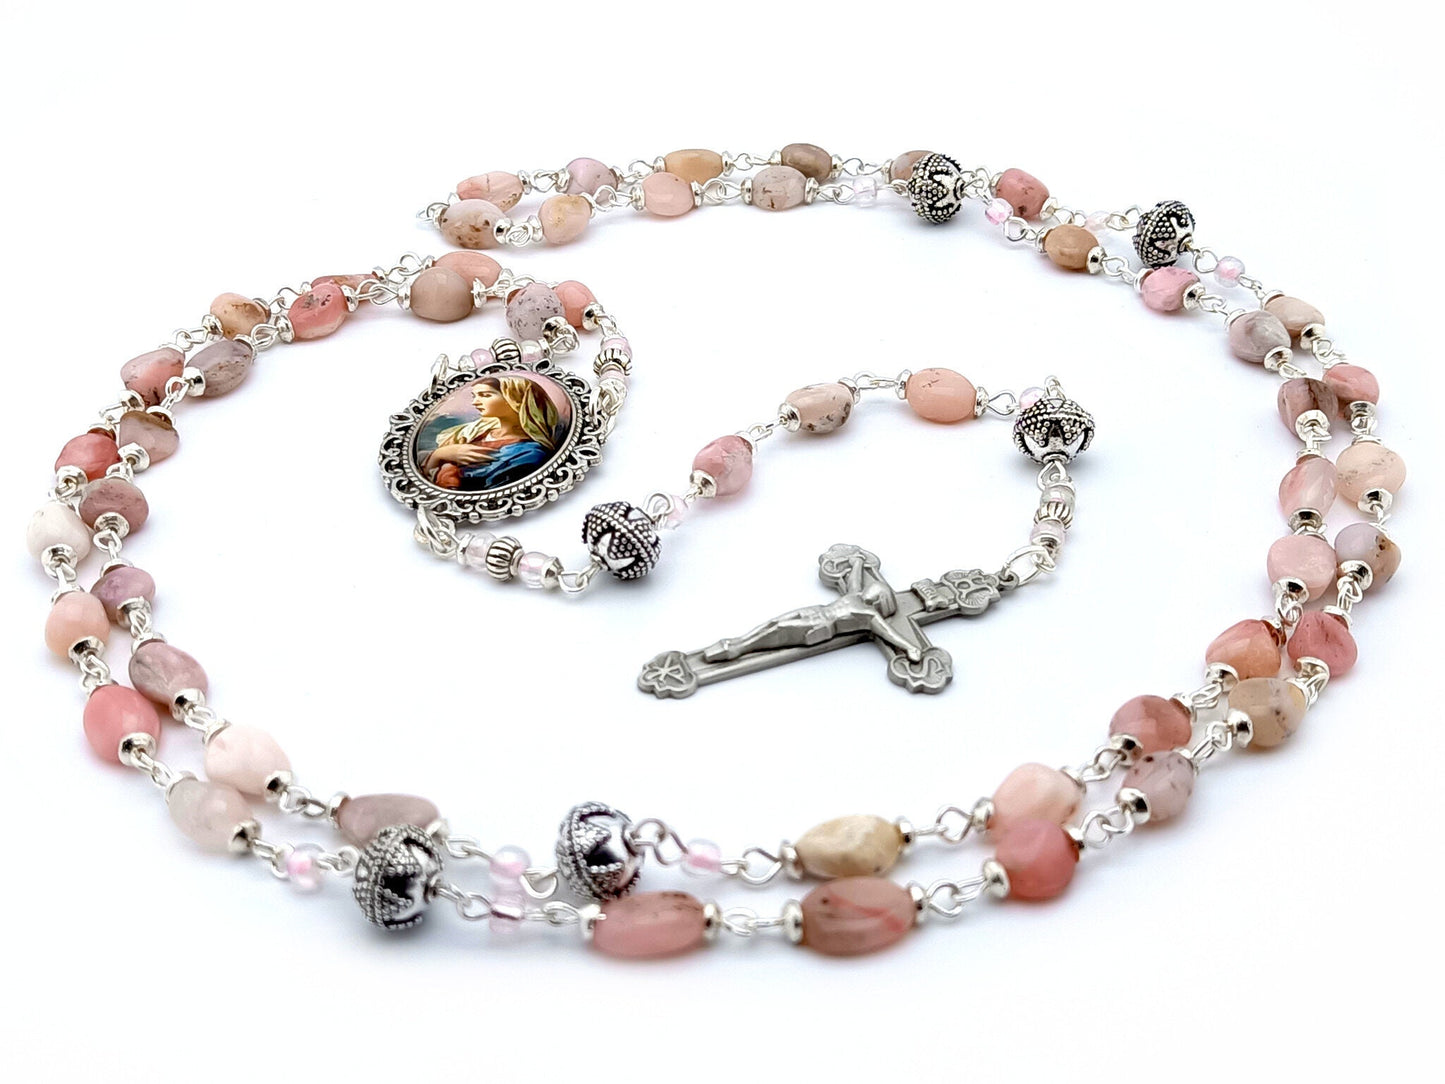 Our Lady's Fiat unique rosary beads with pink opal nugget beads, silver pater beads, crucifix and centre medal.